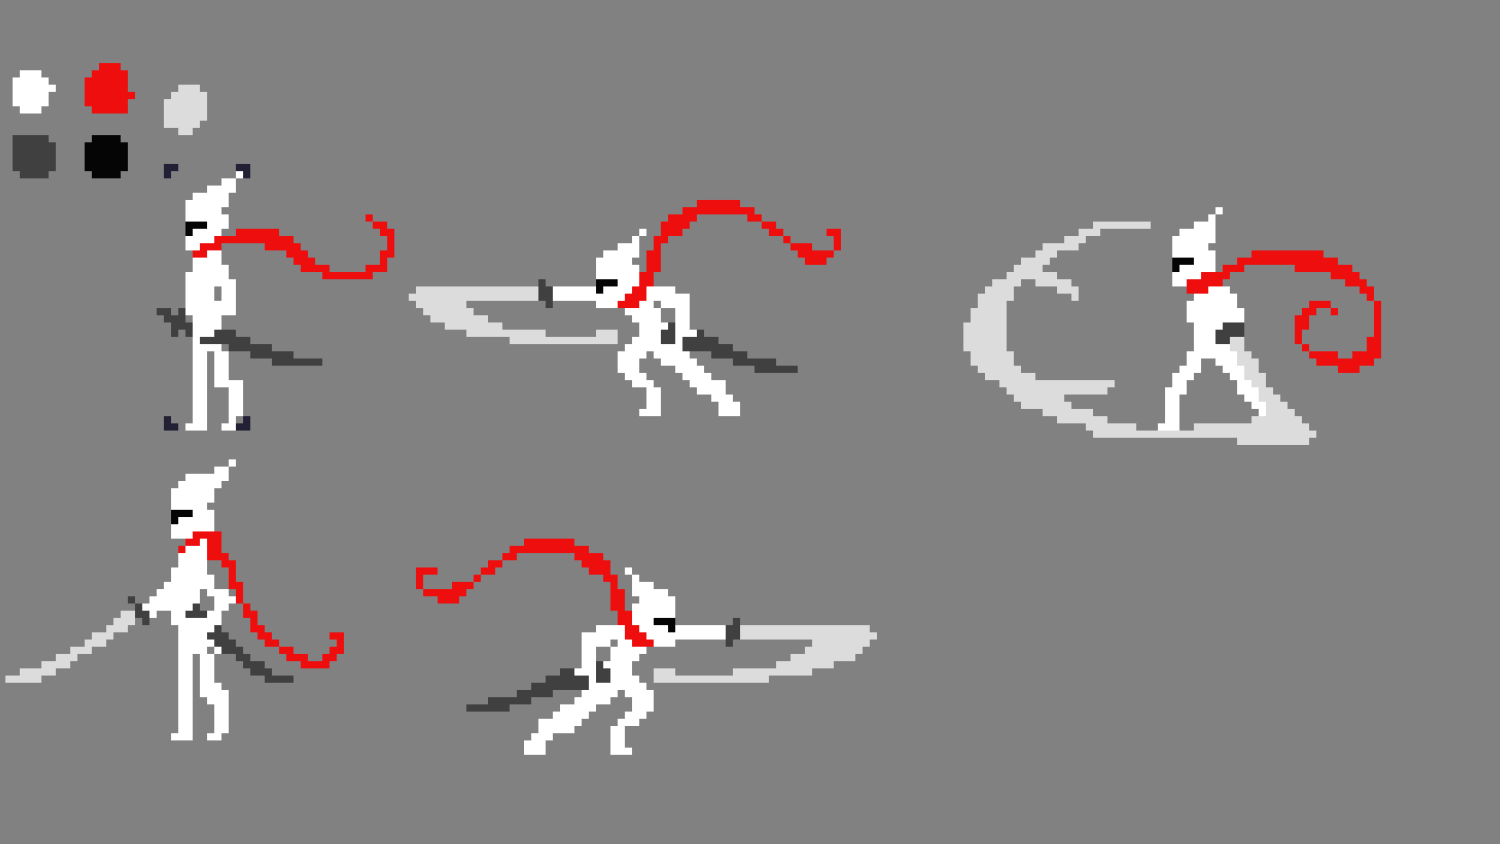 knight in various action poses, slicing the katana forward in multiple mockup attack animations